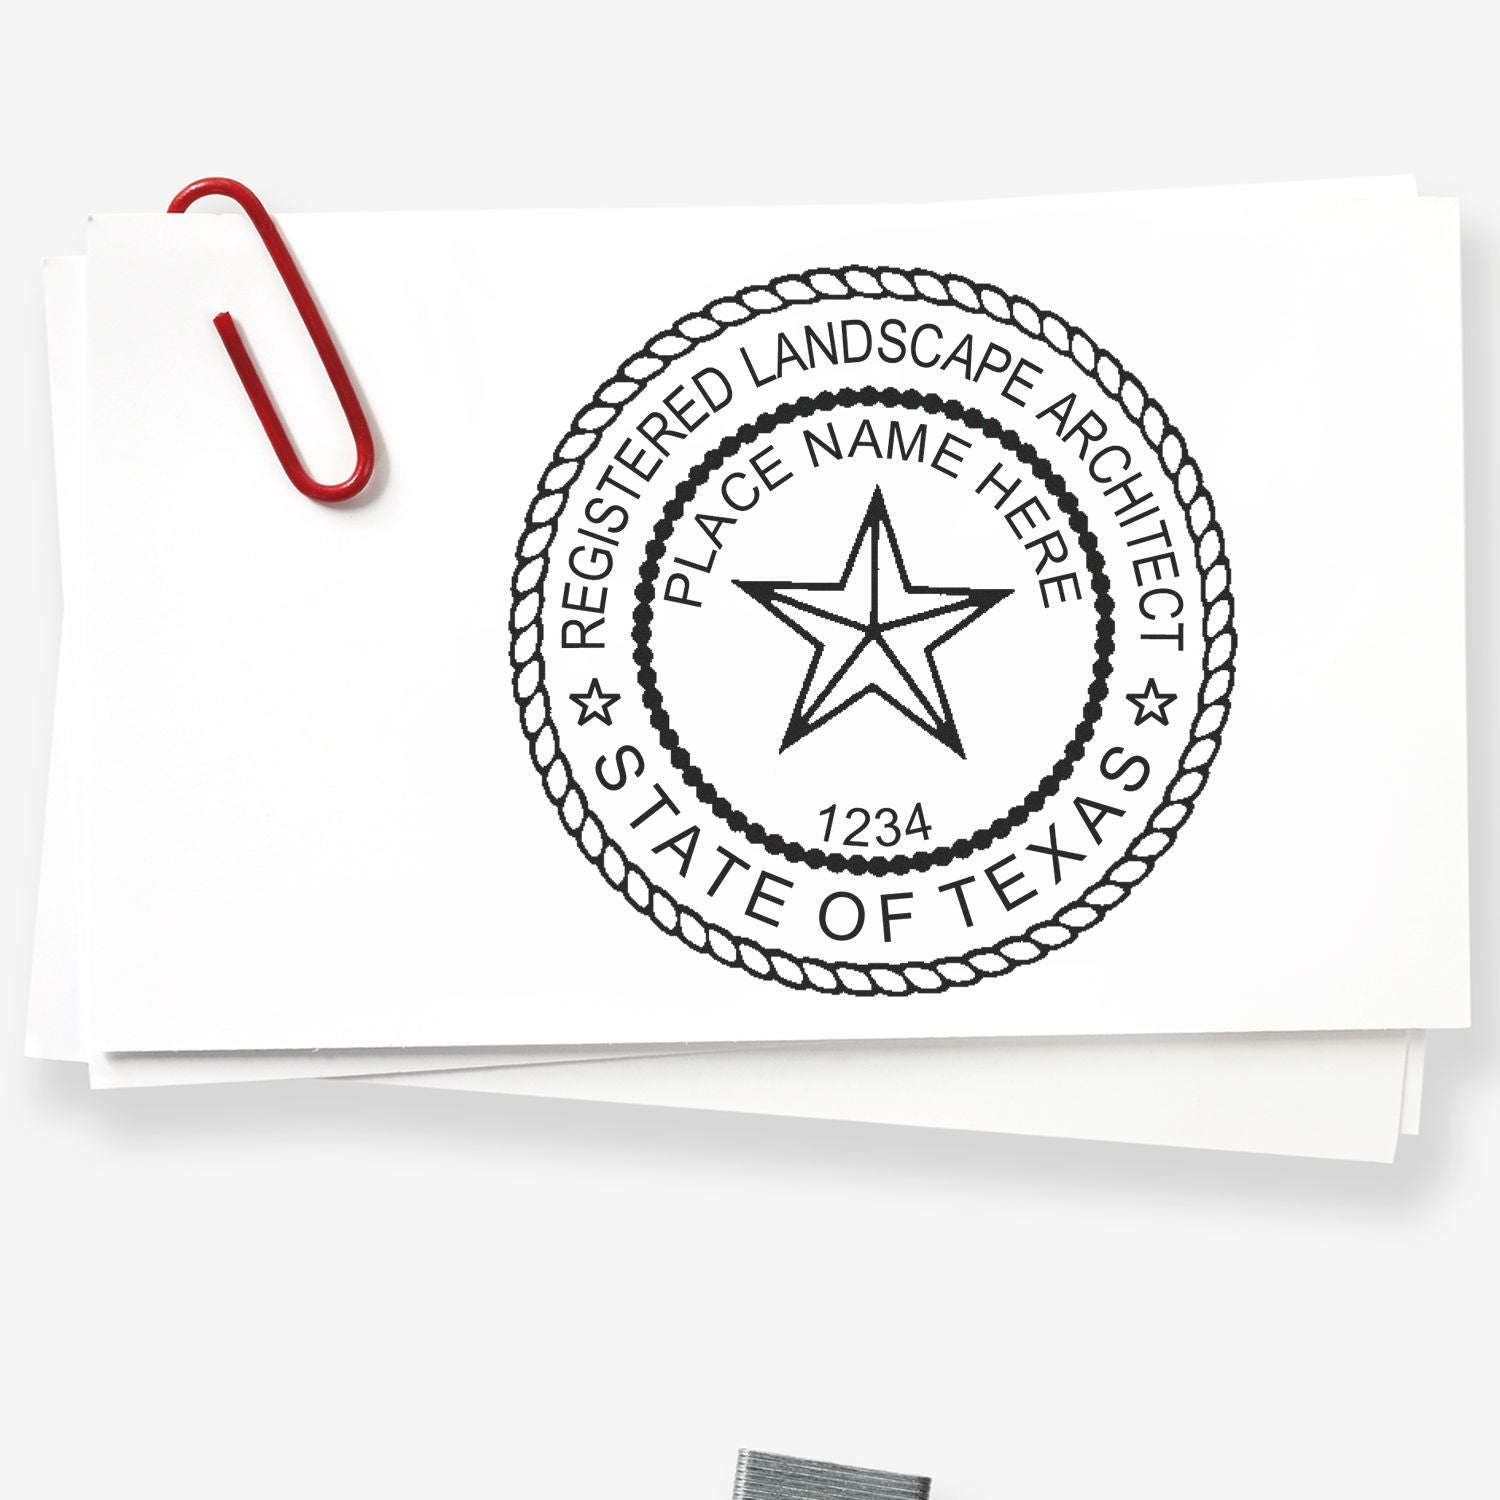 The main image for the Self-Inking Texas Landscape Architect Stamp depicting a sample of the imprint and electronic files